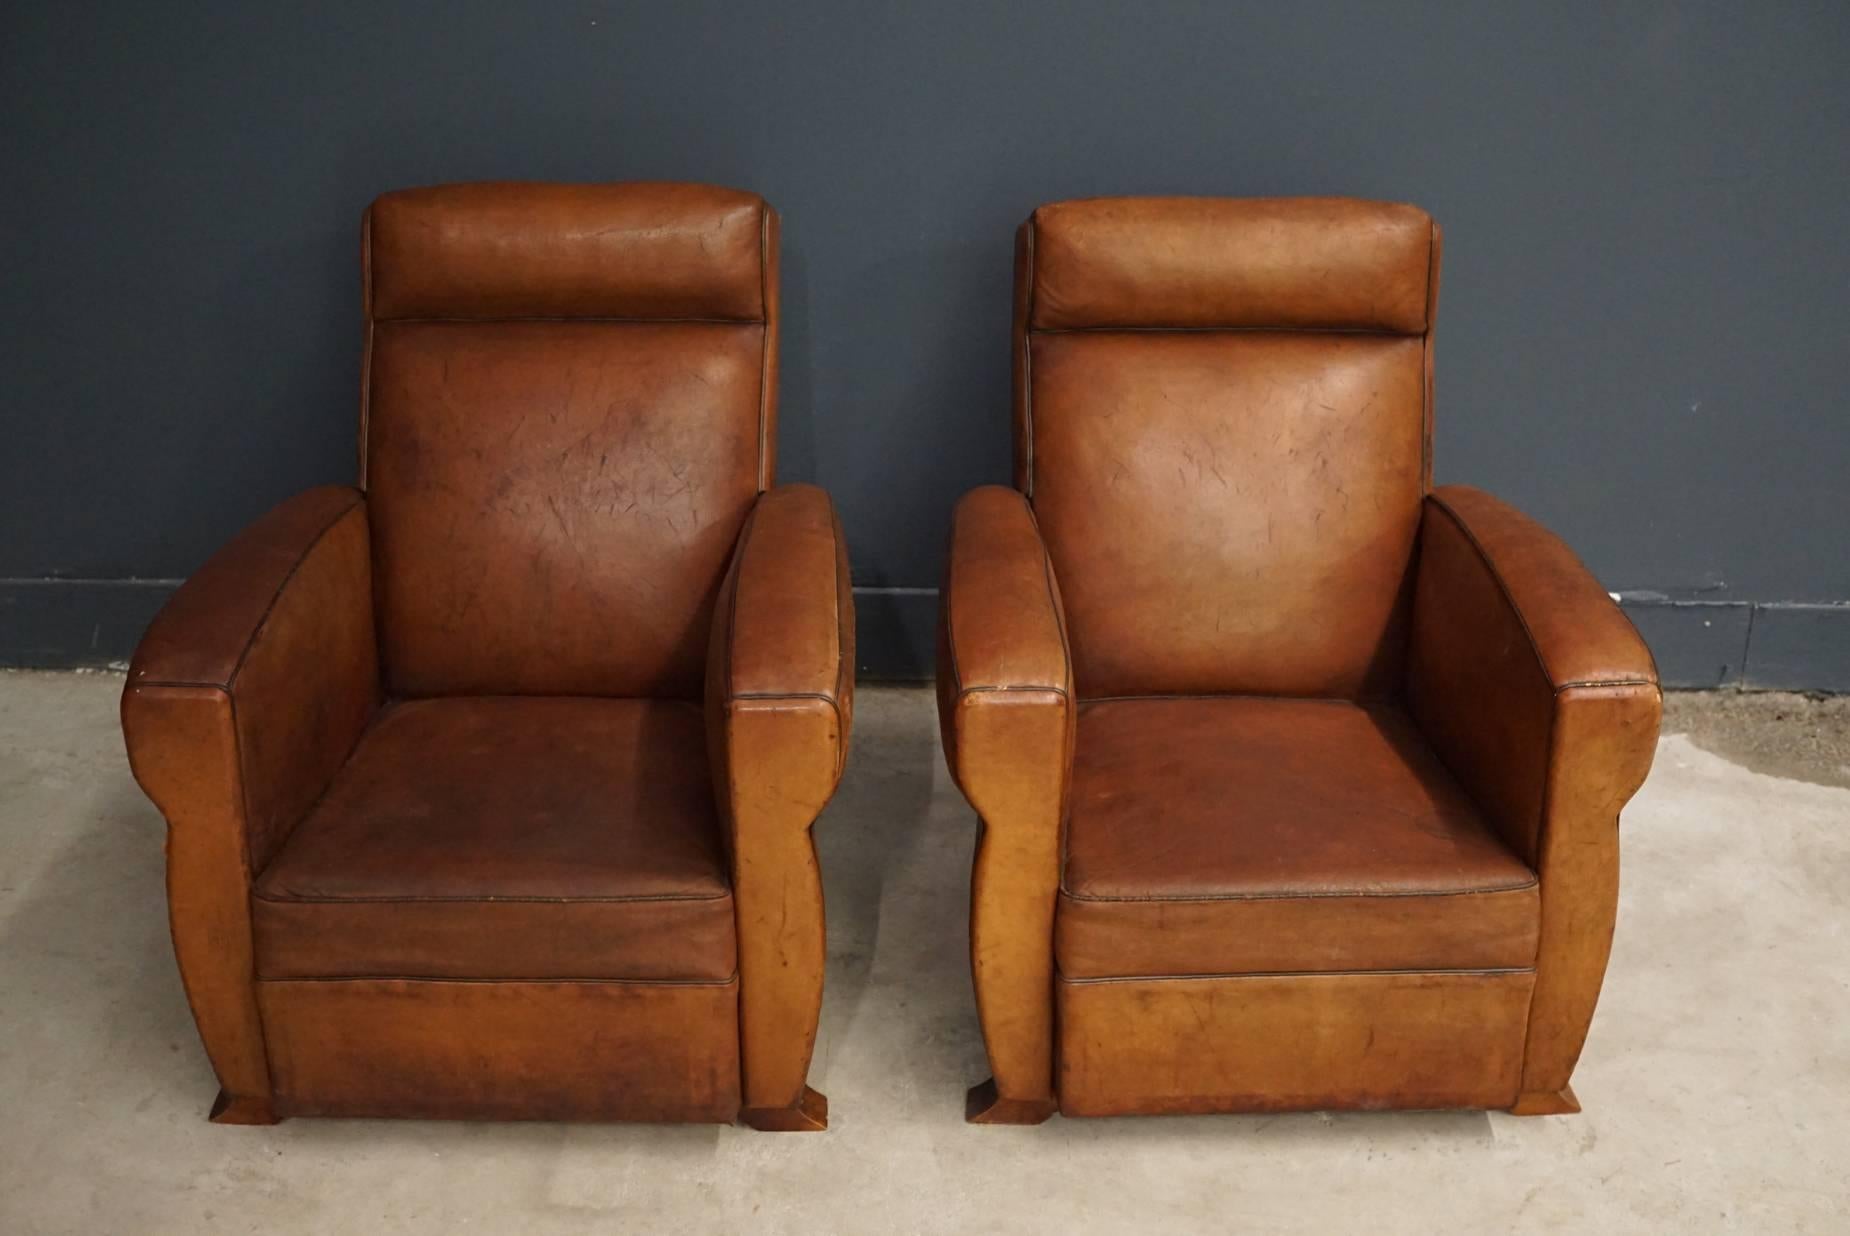 Industrial Pair of French Cognac Leather Club Chairs, 1940s